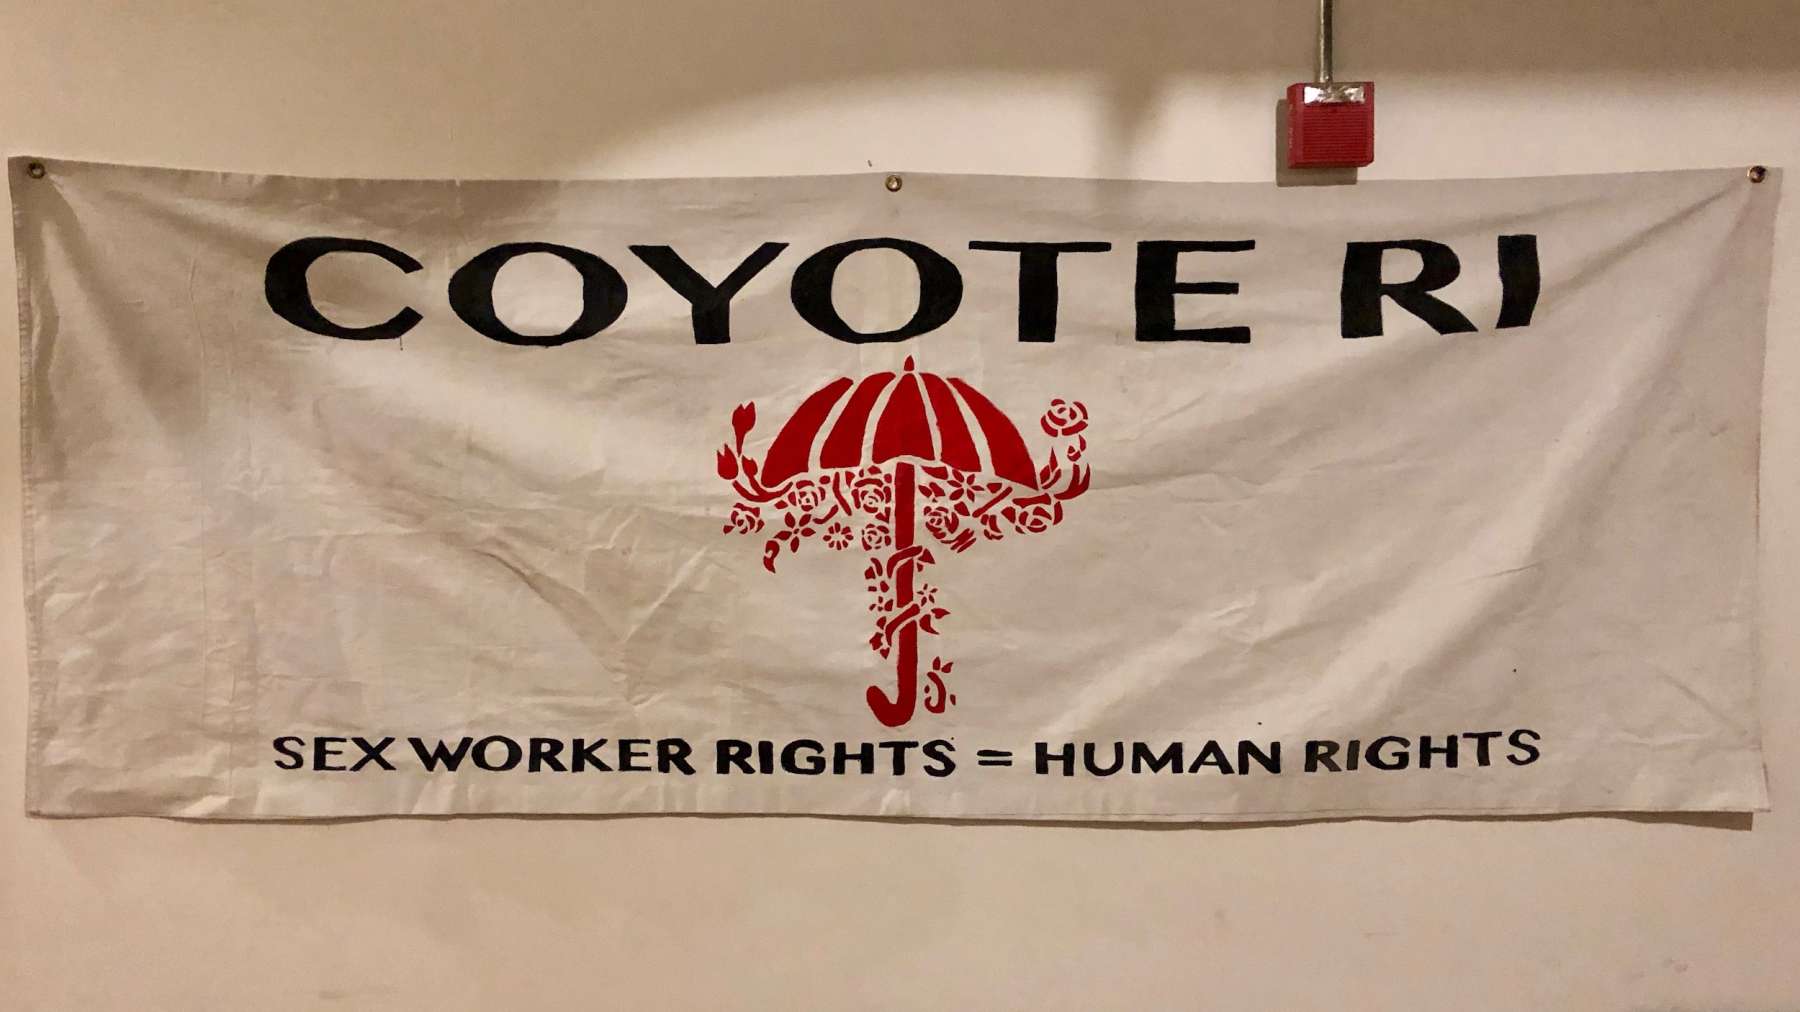 COYOTE RI urges DC Circuit Court to overturn harmful sex trafficking law